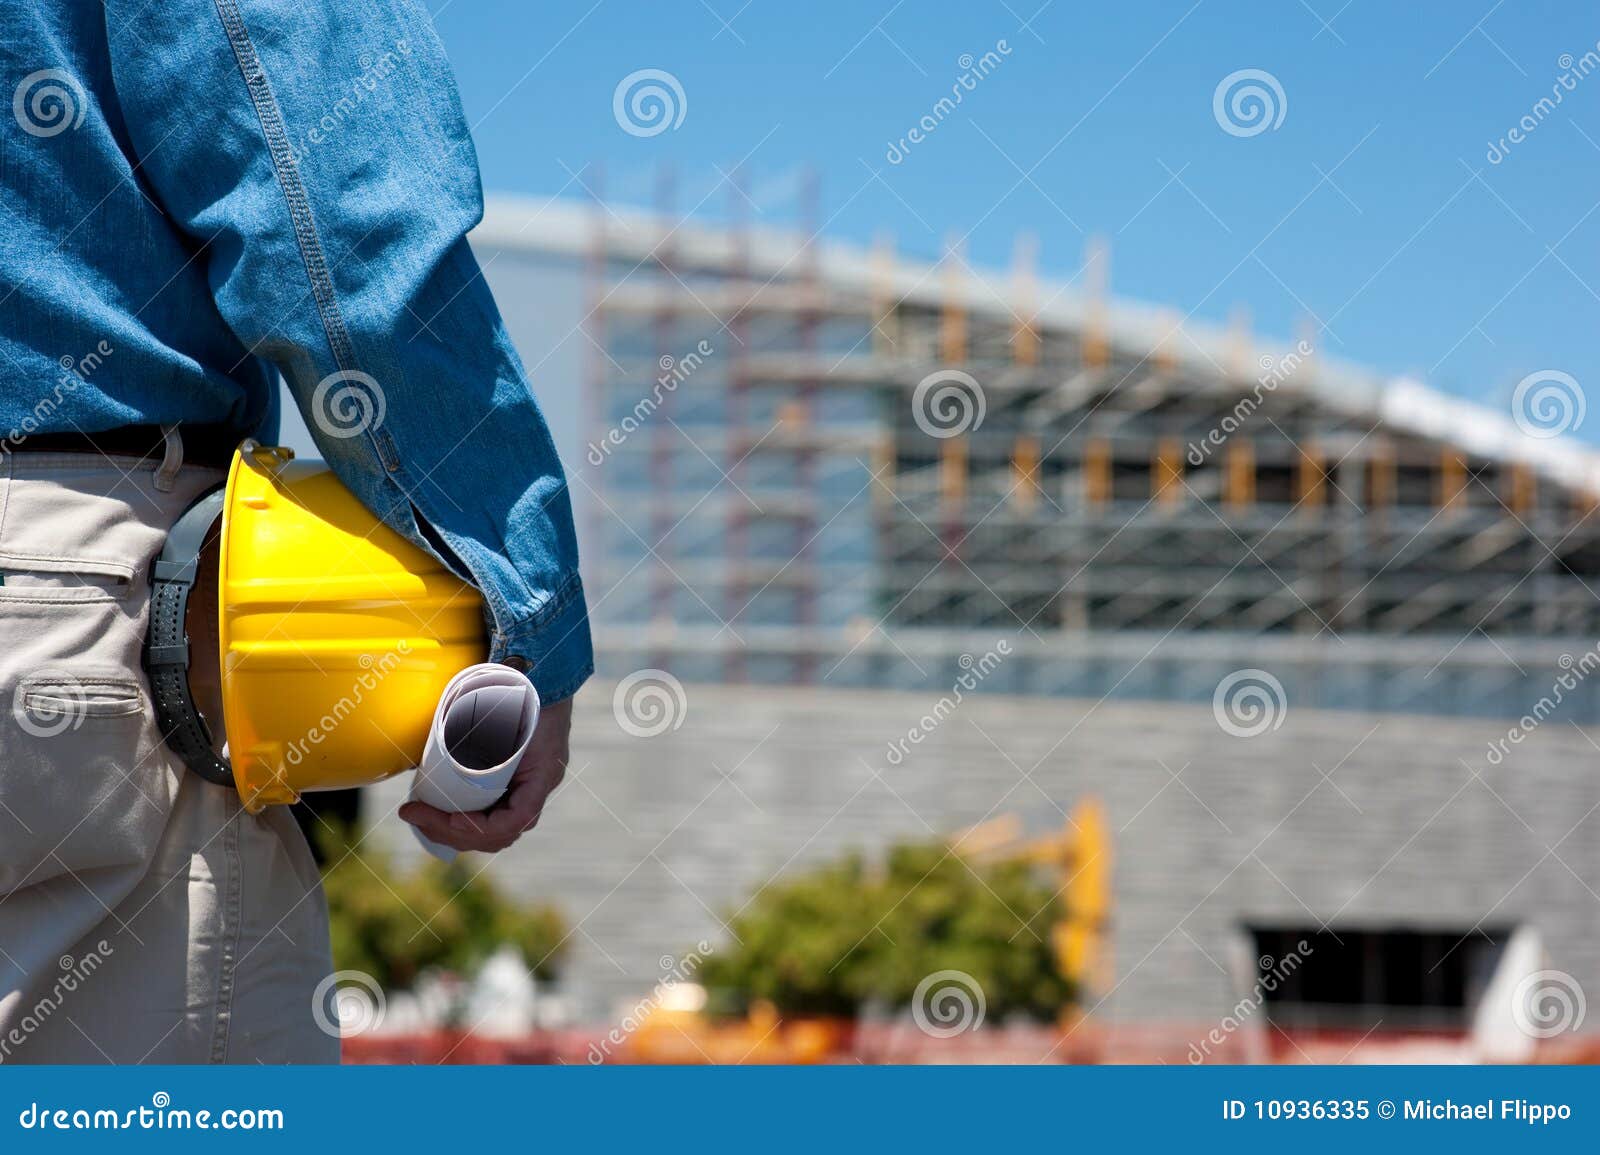 construction worker at construction site